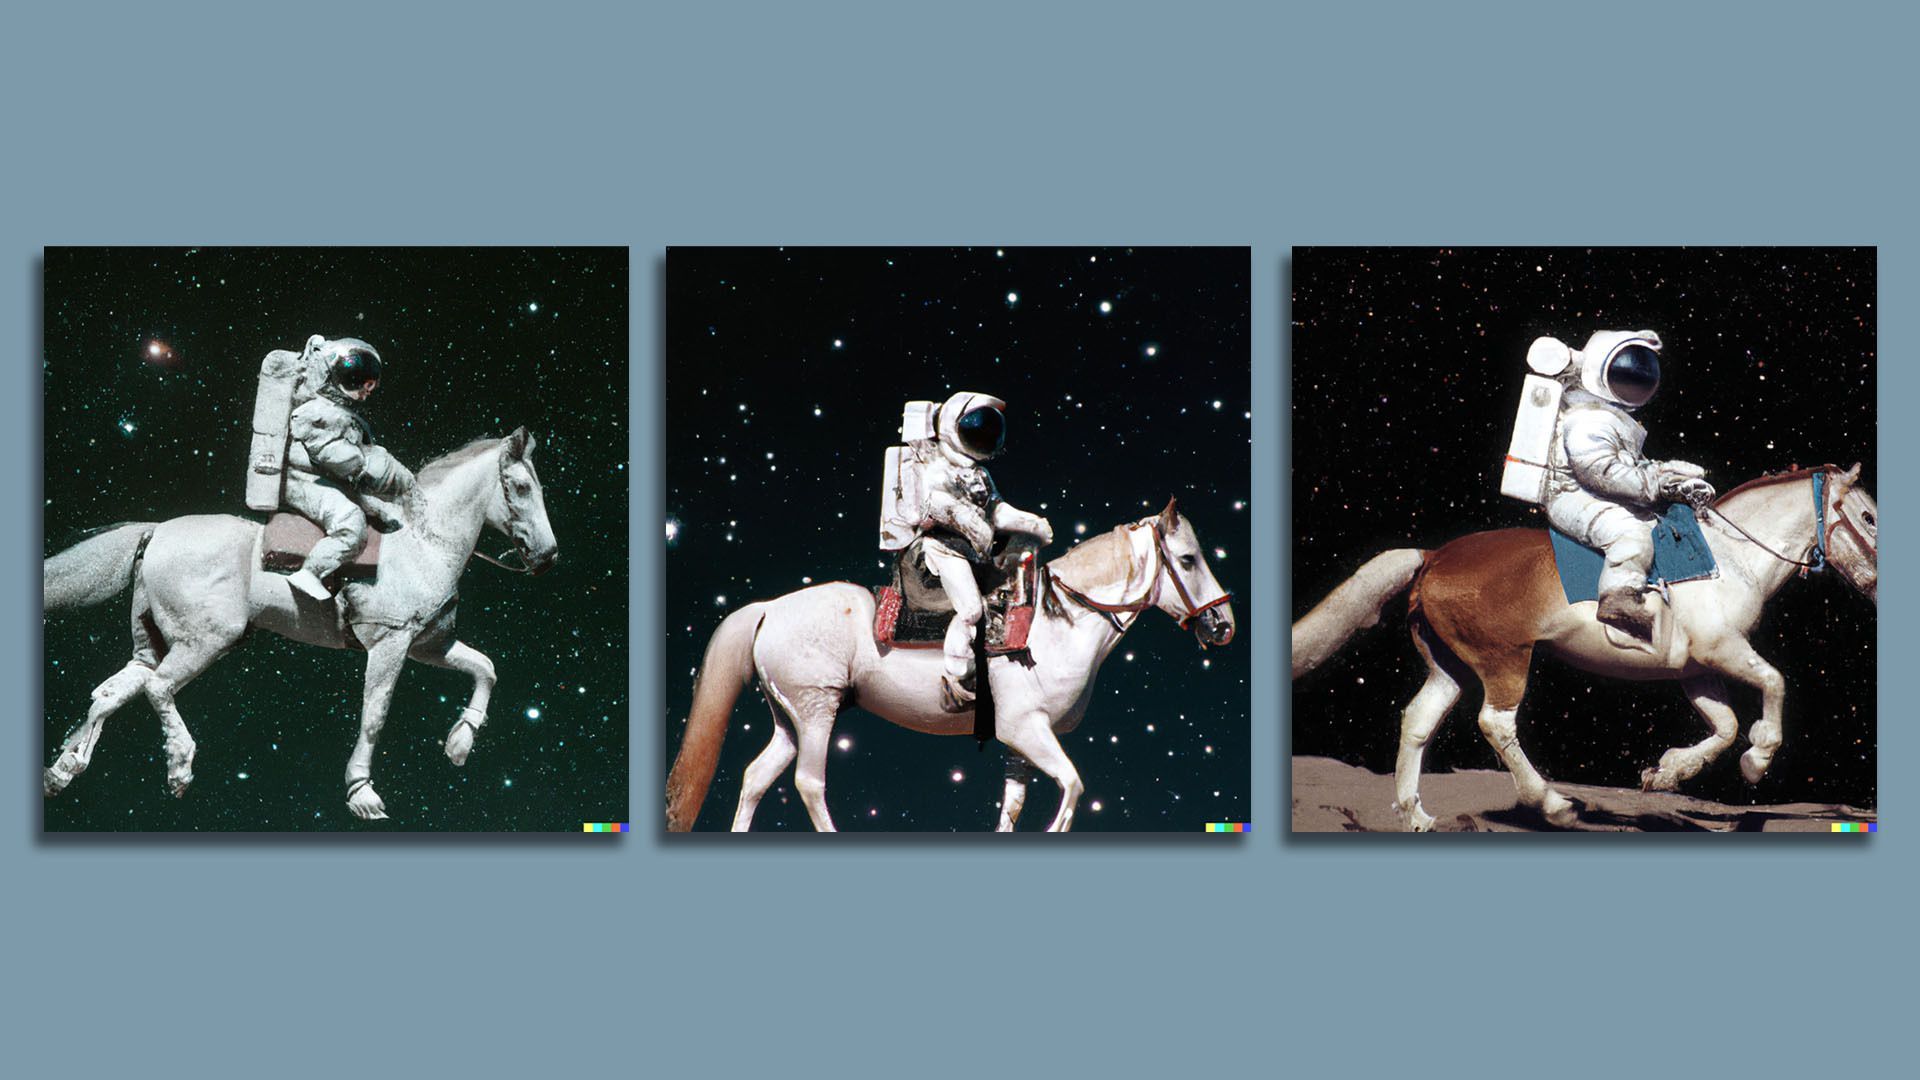 Images generated by DALL-E 2 in response to the prompt "astronaut riding a horse." Credit: OpenAI